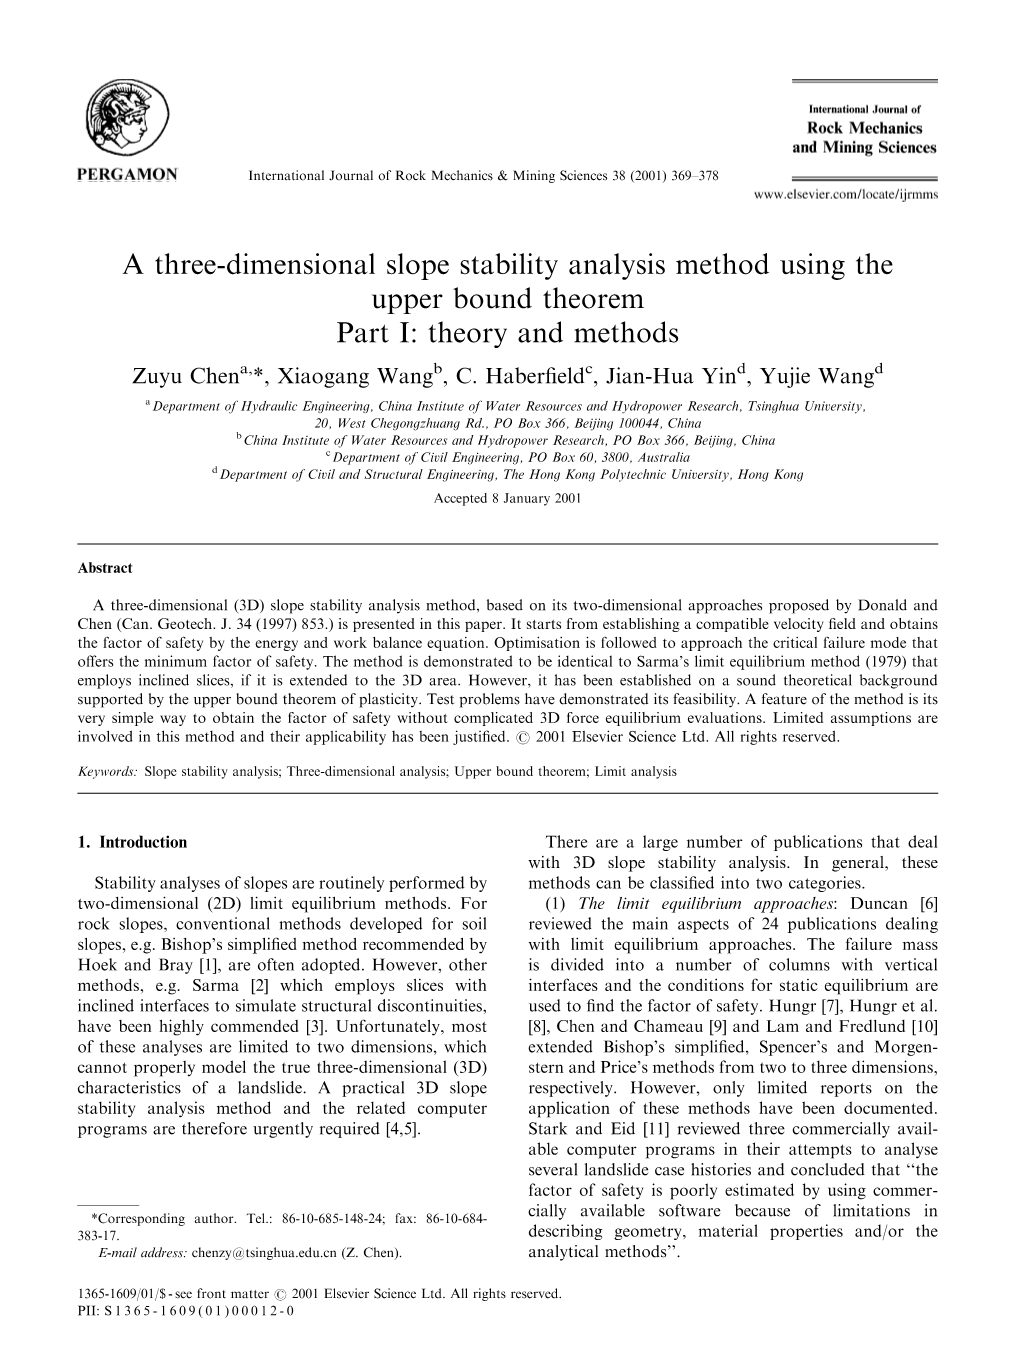 A Three-Dimensional Slope Stability Analysis Method Using the Upper Bound Theorem Part I: Theory and Methods Zuyu Chena,*, Xiaogang Wangb, C